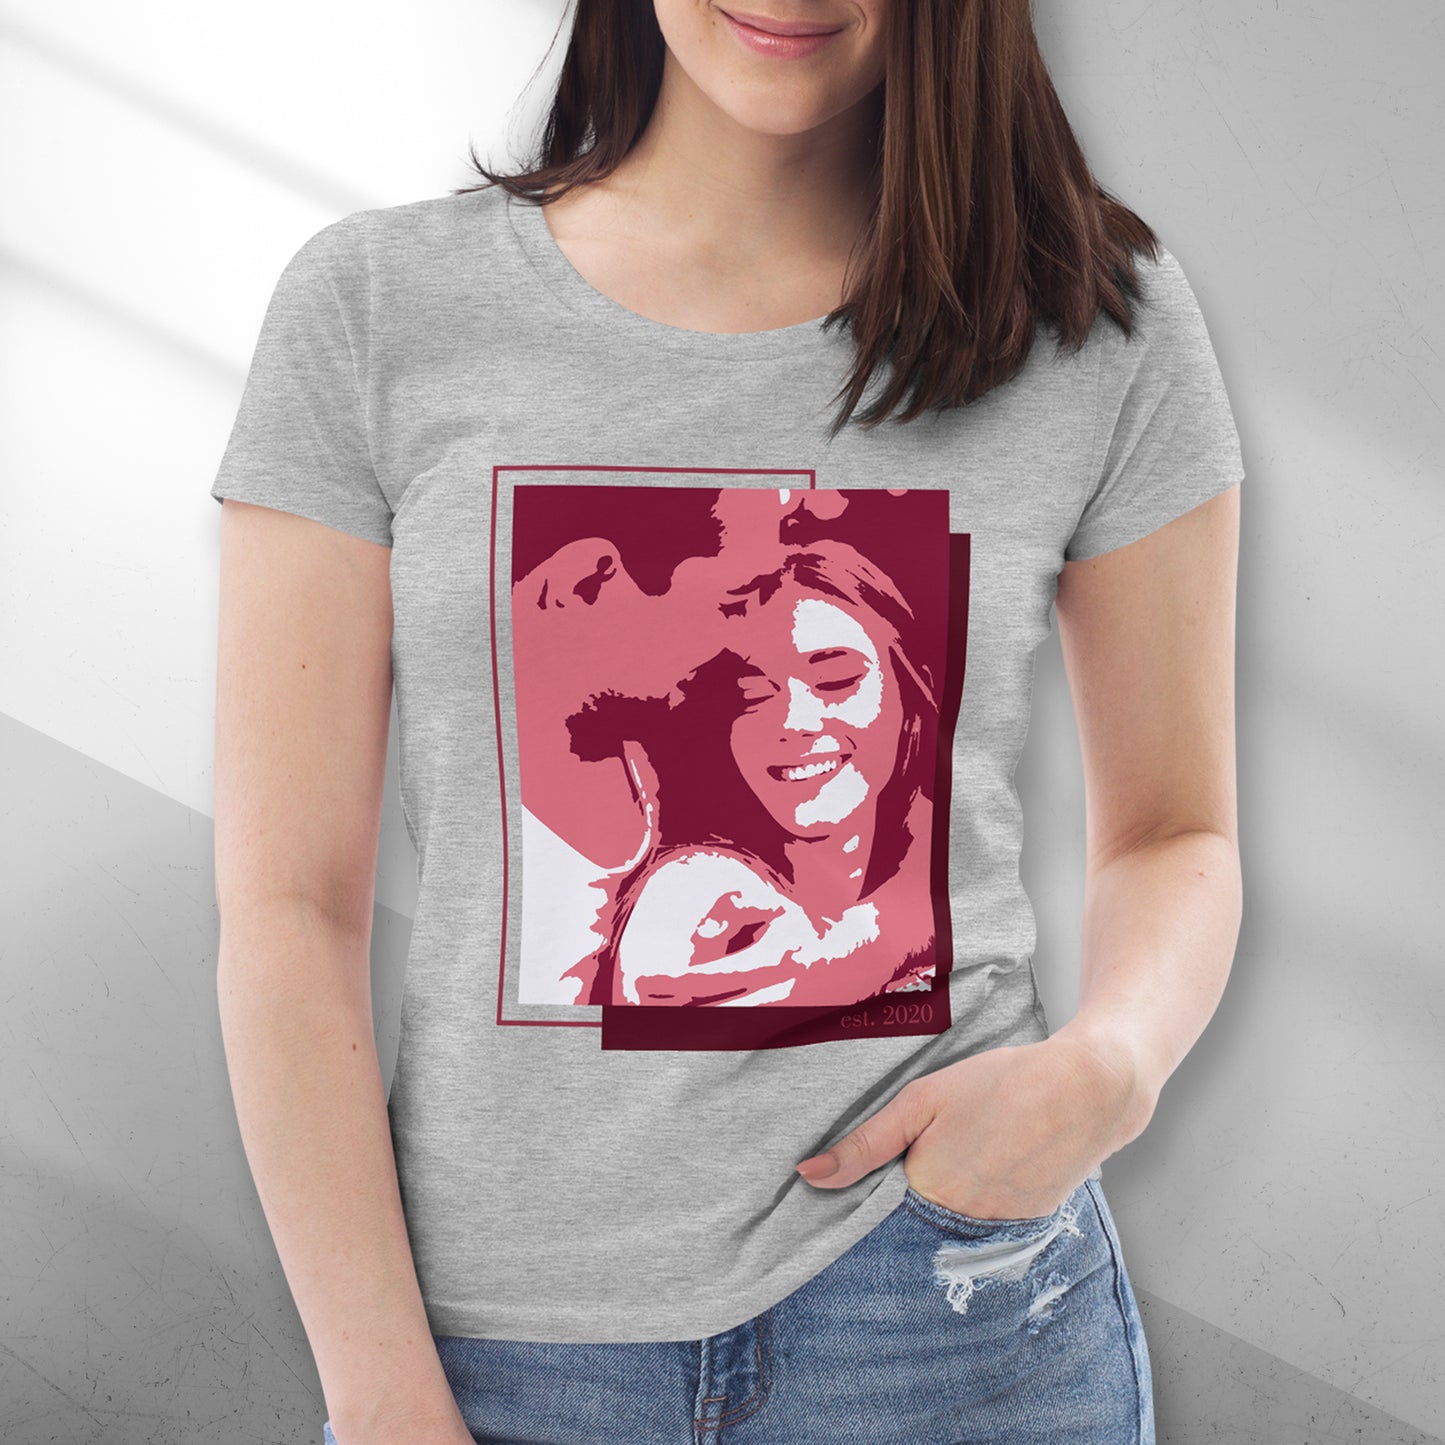 Personalized Women's T-Shirt - Large Portrait in Red | Seepu